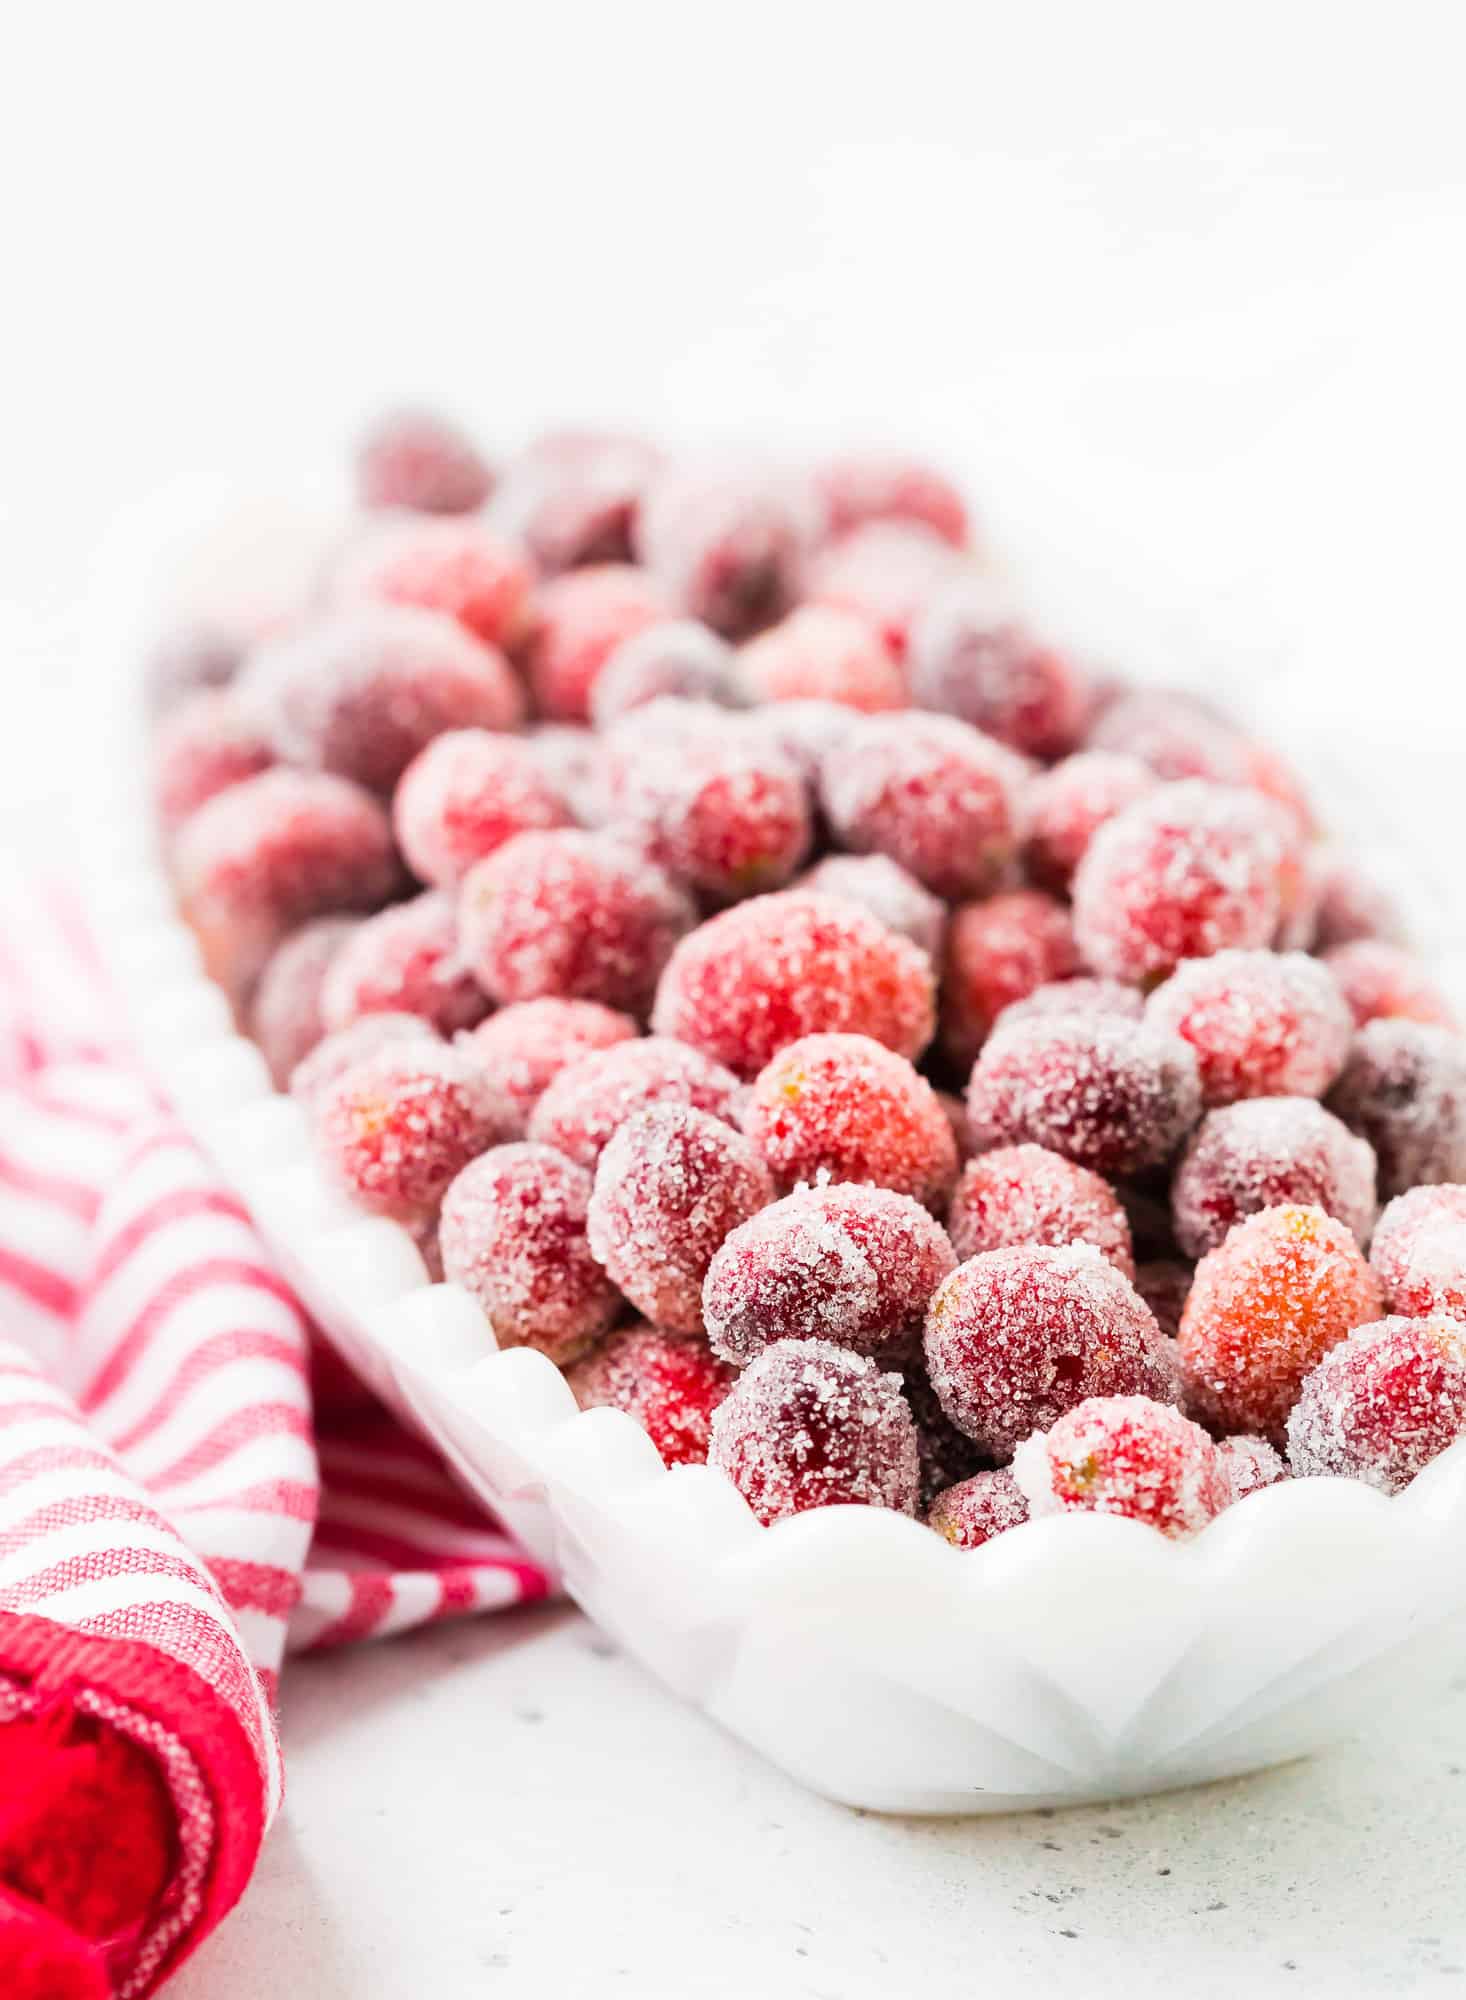 Candied cranberries in a white bowl set on a red and white linen.